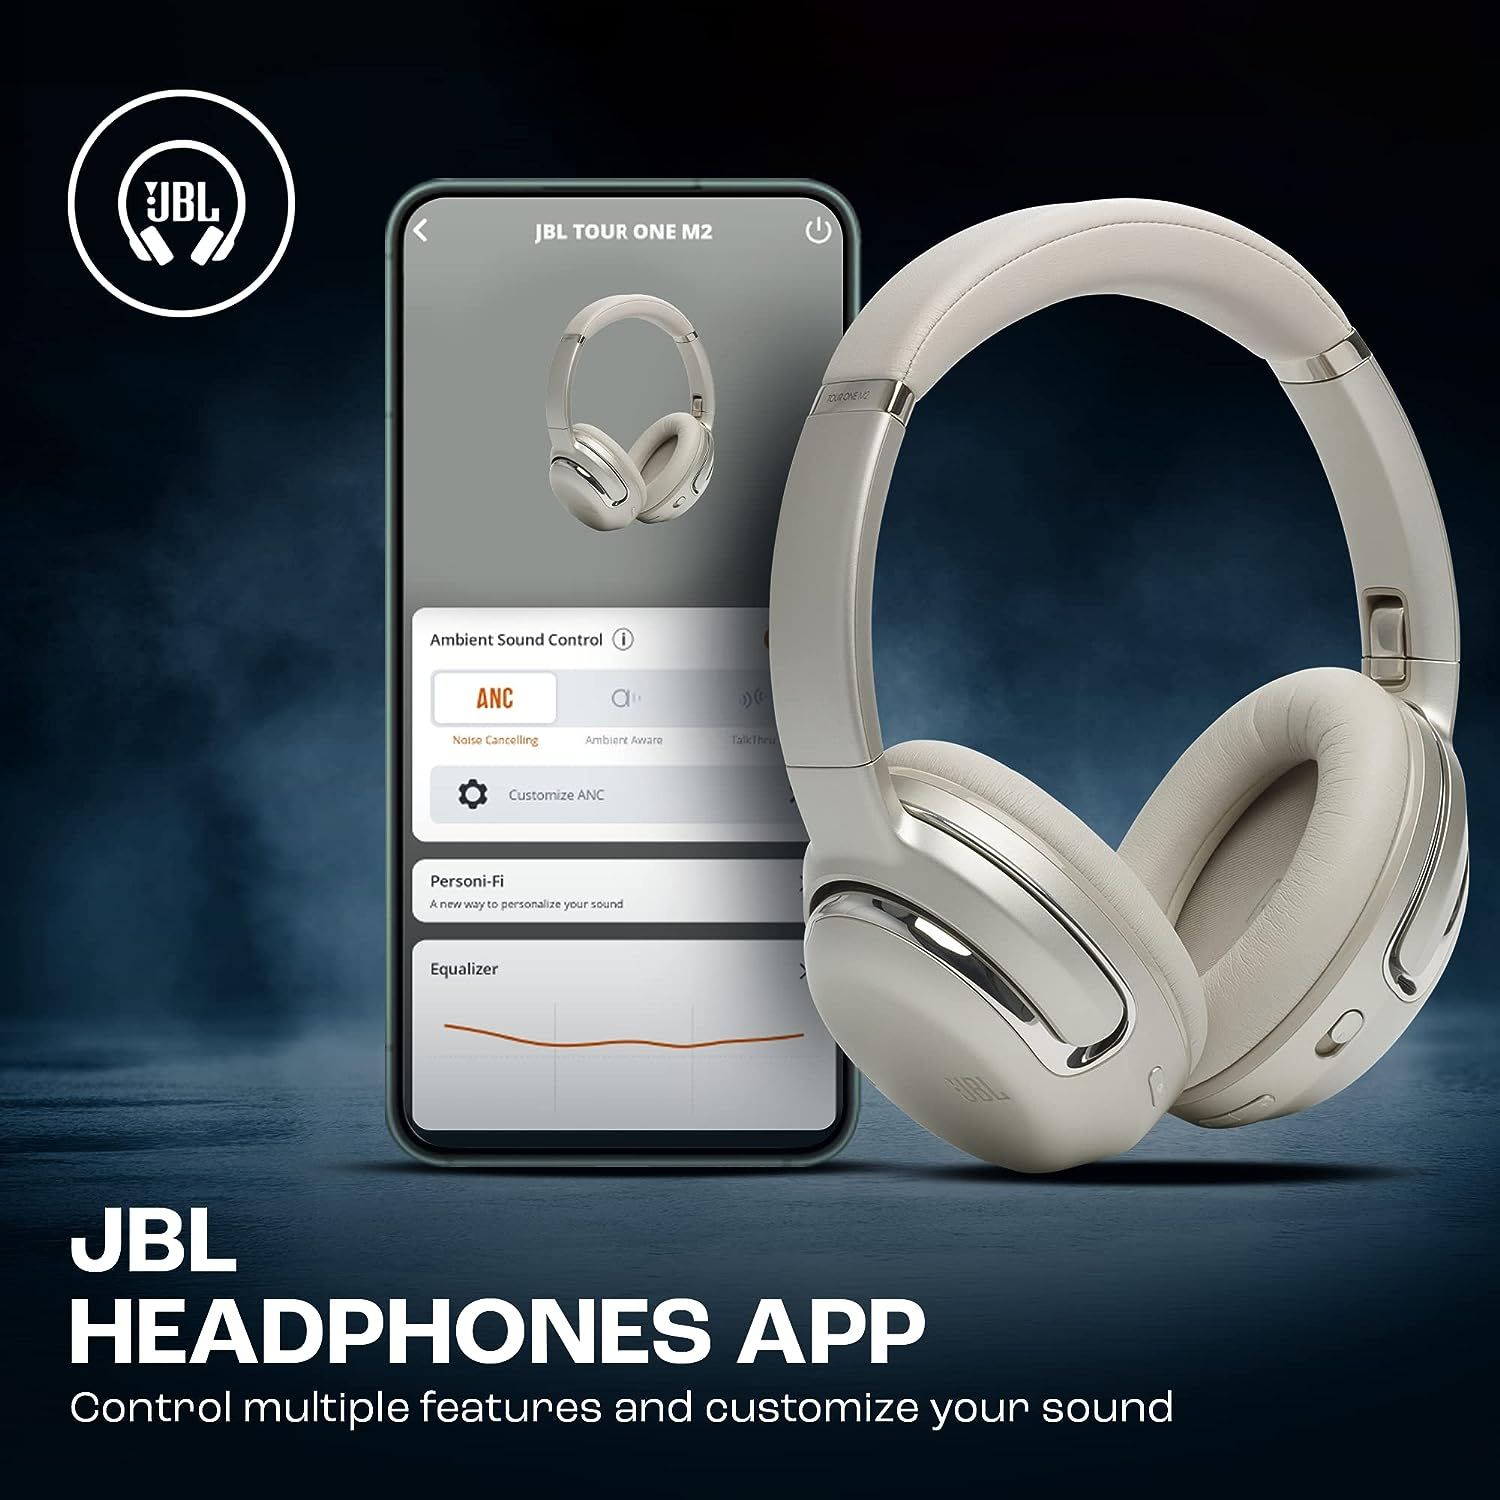 One Over-Ear 2.0, Pro Wireless Legendary Noise Sound, - Personi-Fi + درهمي Ambient, Tour Sound, Bluetooth JBL ANC Smart - Dirhami Cancelling 4-Mic, Immersive M2 Spatial Headphones,